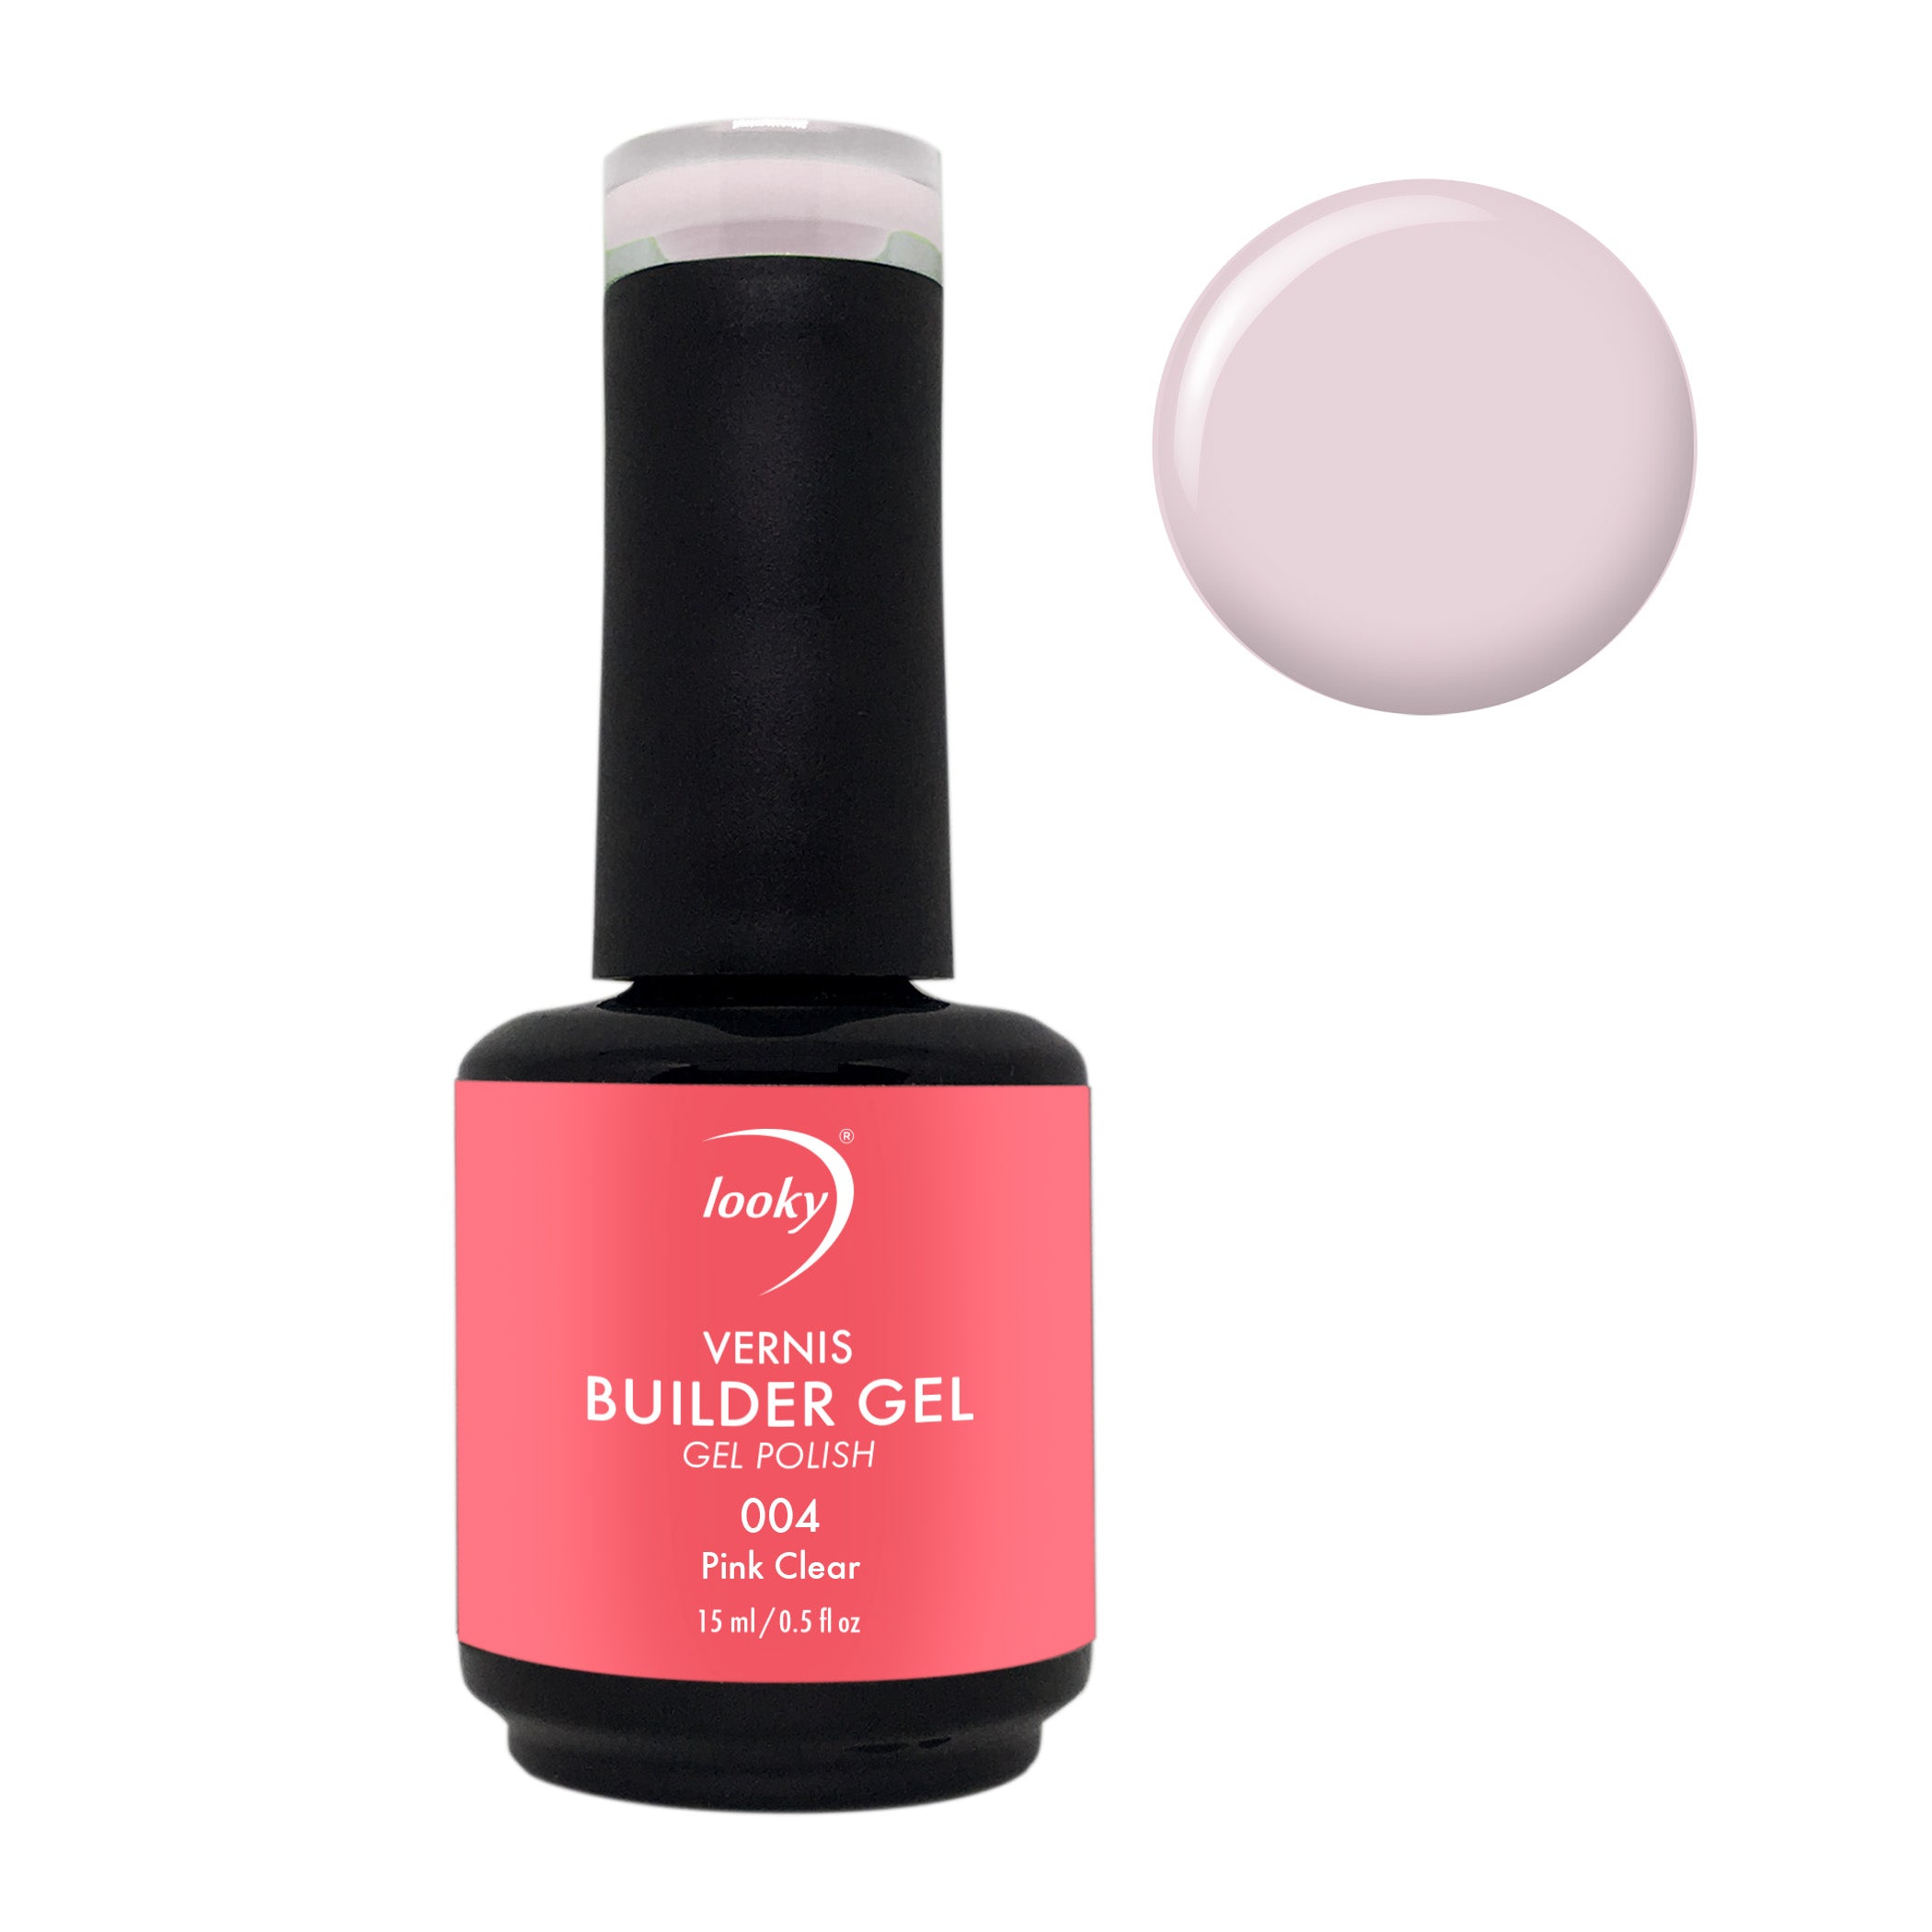 How Do I Choose the Best French Manicure Nail Polish?